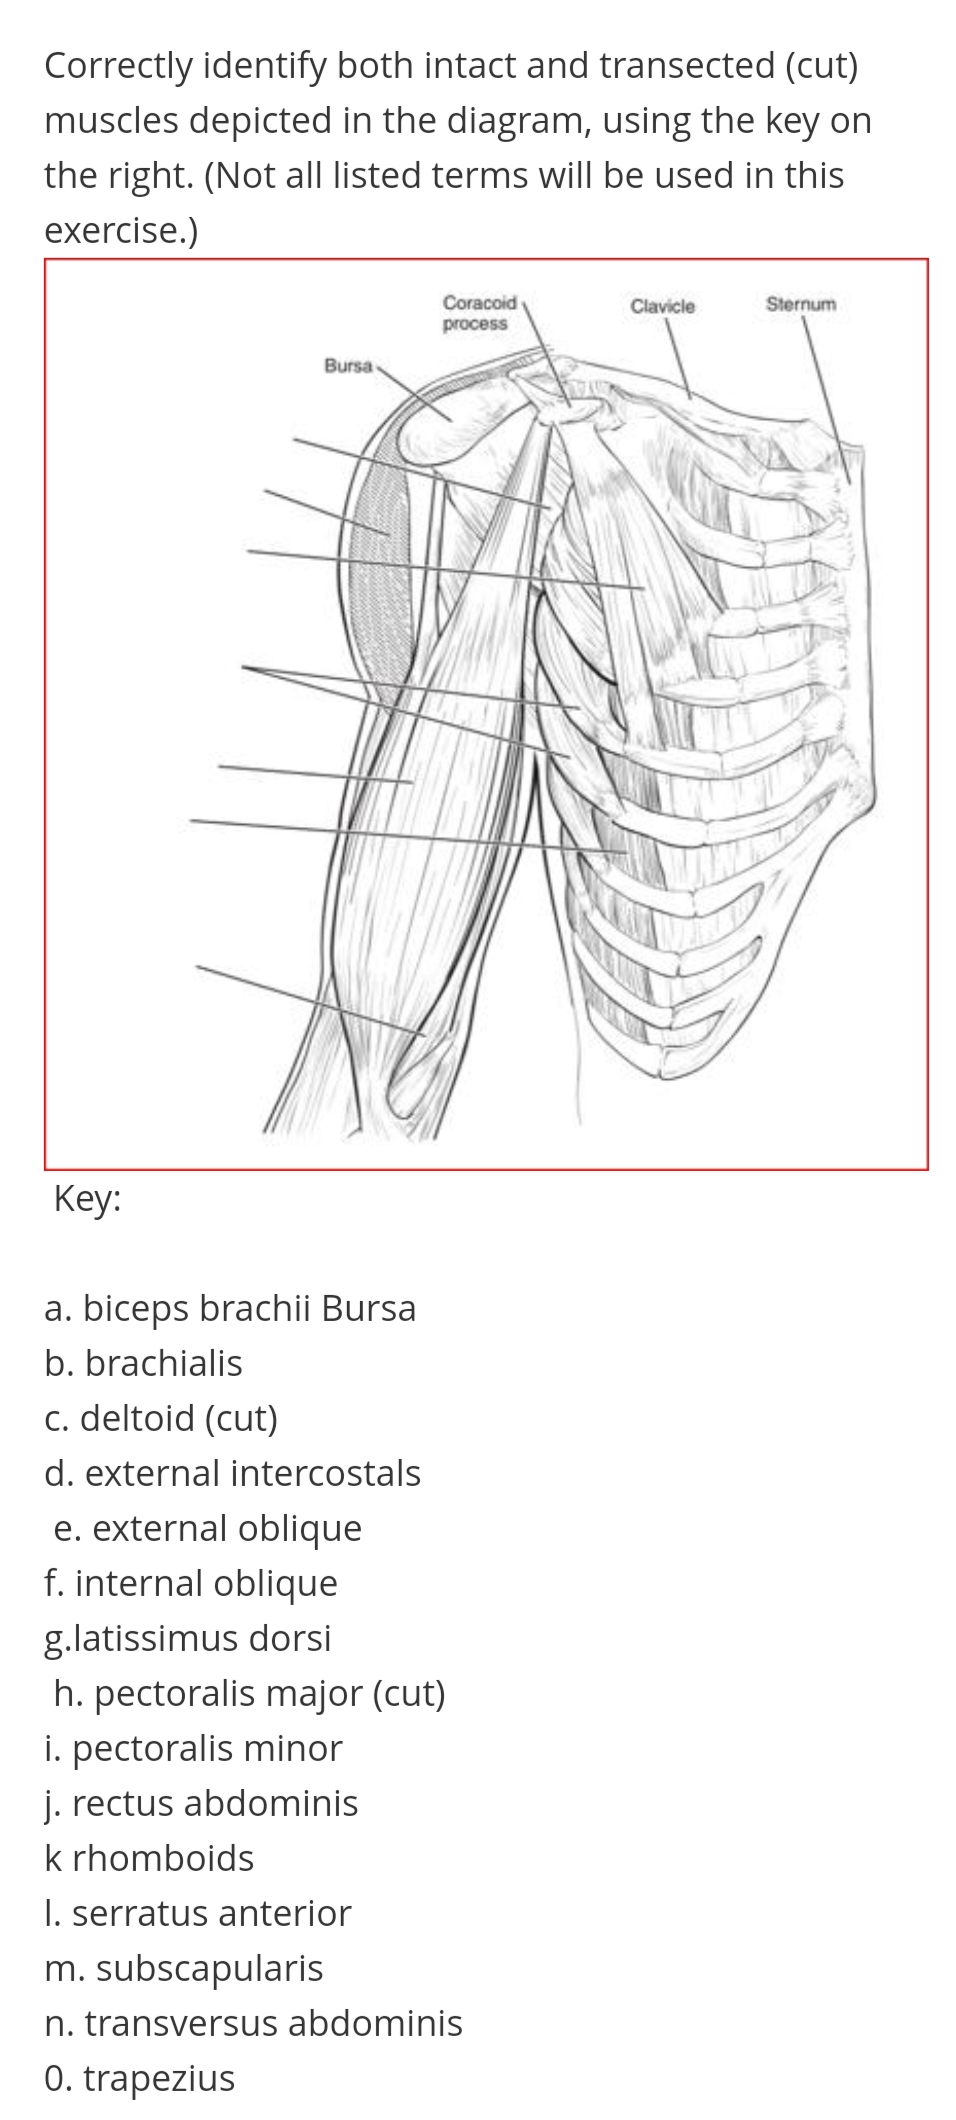 Correctly identify both intact and transected (cut)
muscles depicted in the diagram, using the key on
the right. (Not all listed terms will be used in this
exercise.)
Clavicle
Sternum
Coracoid
process
Bursa
Key:
a. biceps brachii Bursa
b. brachialis
c. deltoid (cut)
d. external intercostals
e. external oblique
f. internal oblique
g.latissimus dorsi
h. pectoralis major (cut)
pectoralis minor
j. rectus abdominis
k rhomboids
1. serratus anterior
m. subscapularis
n. transversus abdominis
0. trapezius